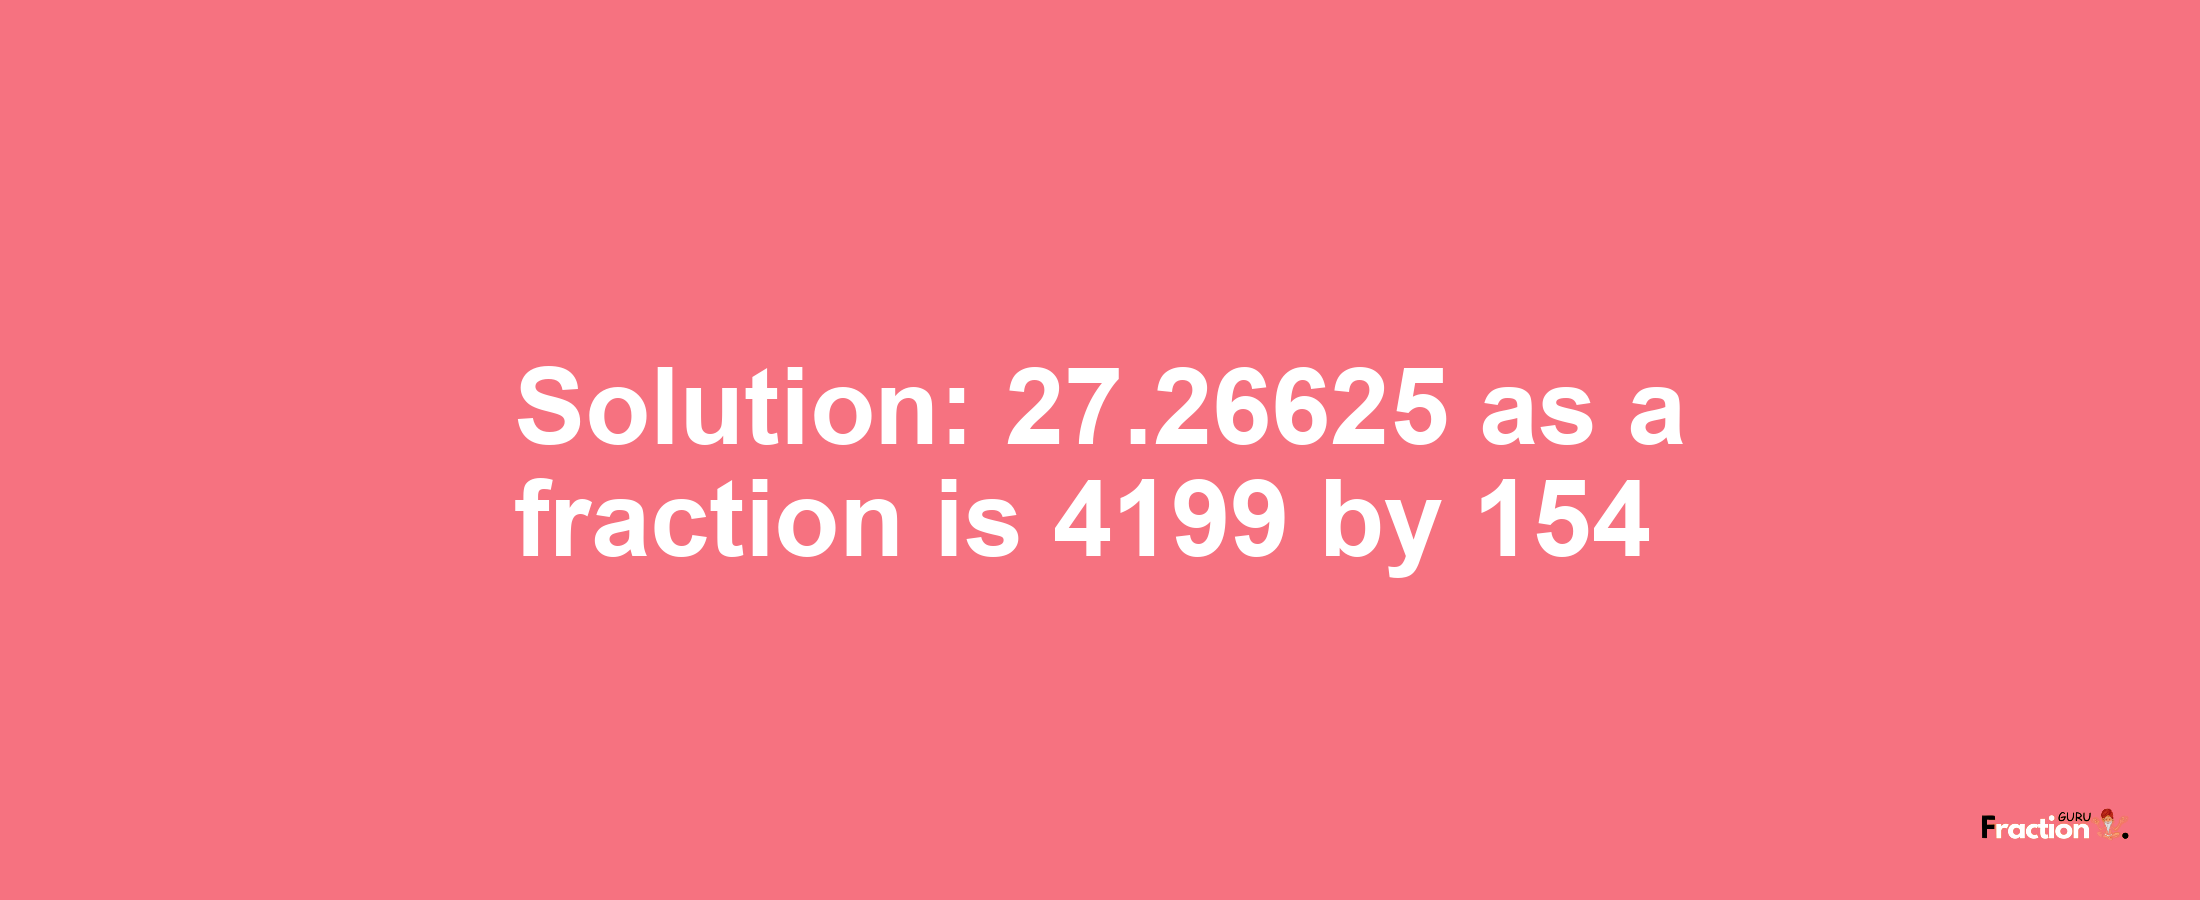 Solution:27.26625 as a fraction is 4199/154